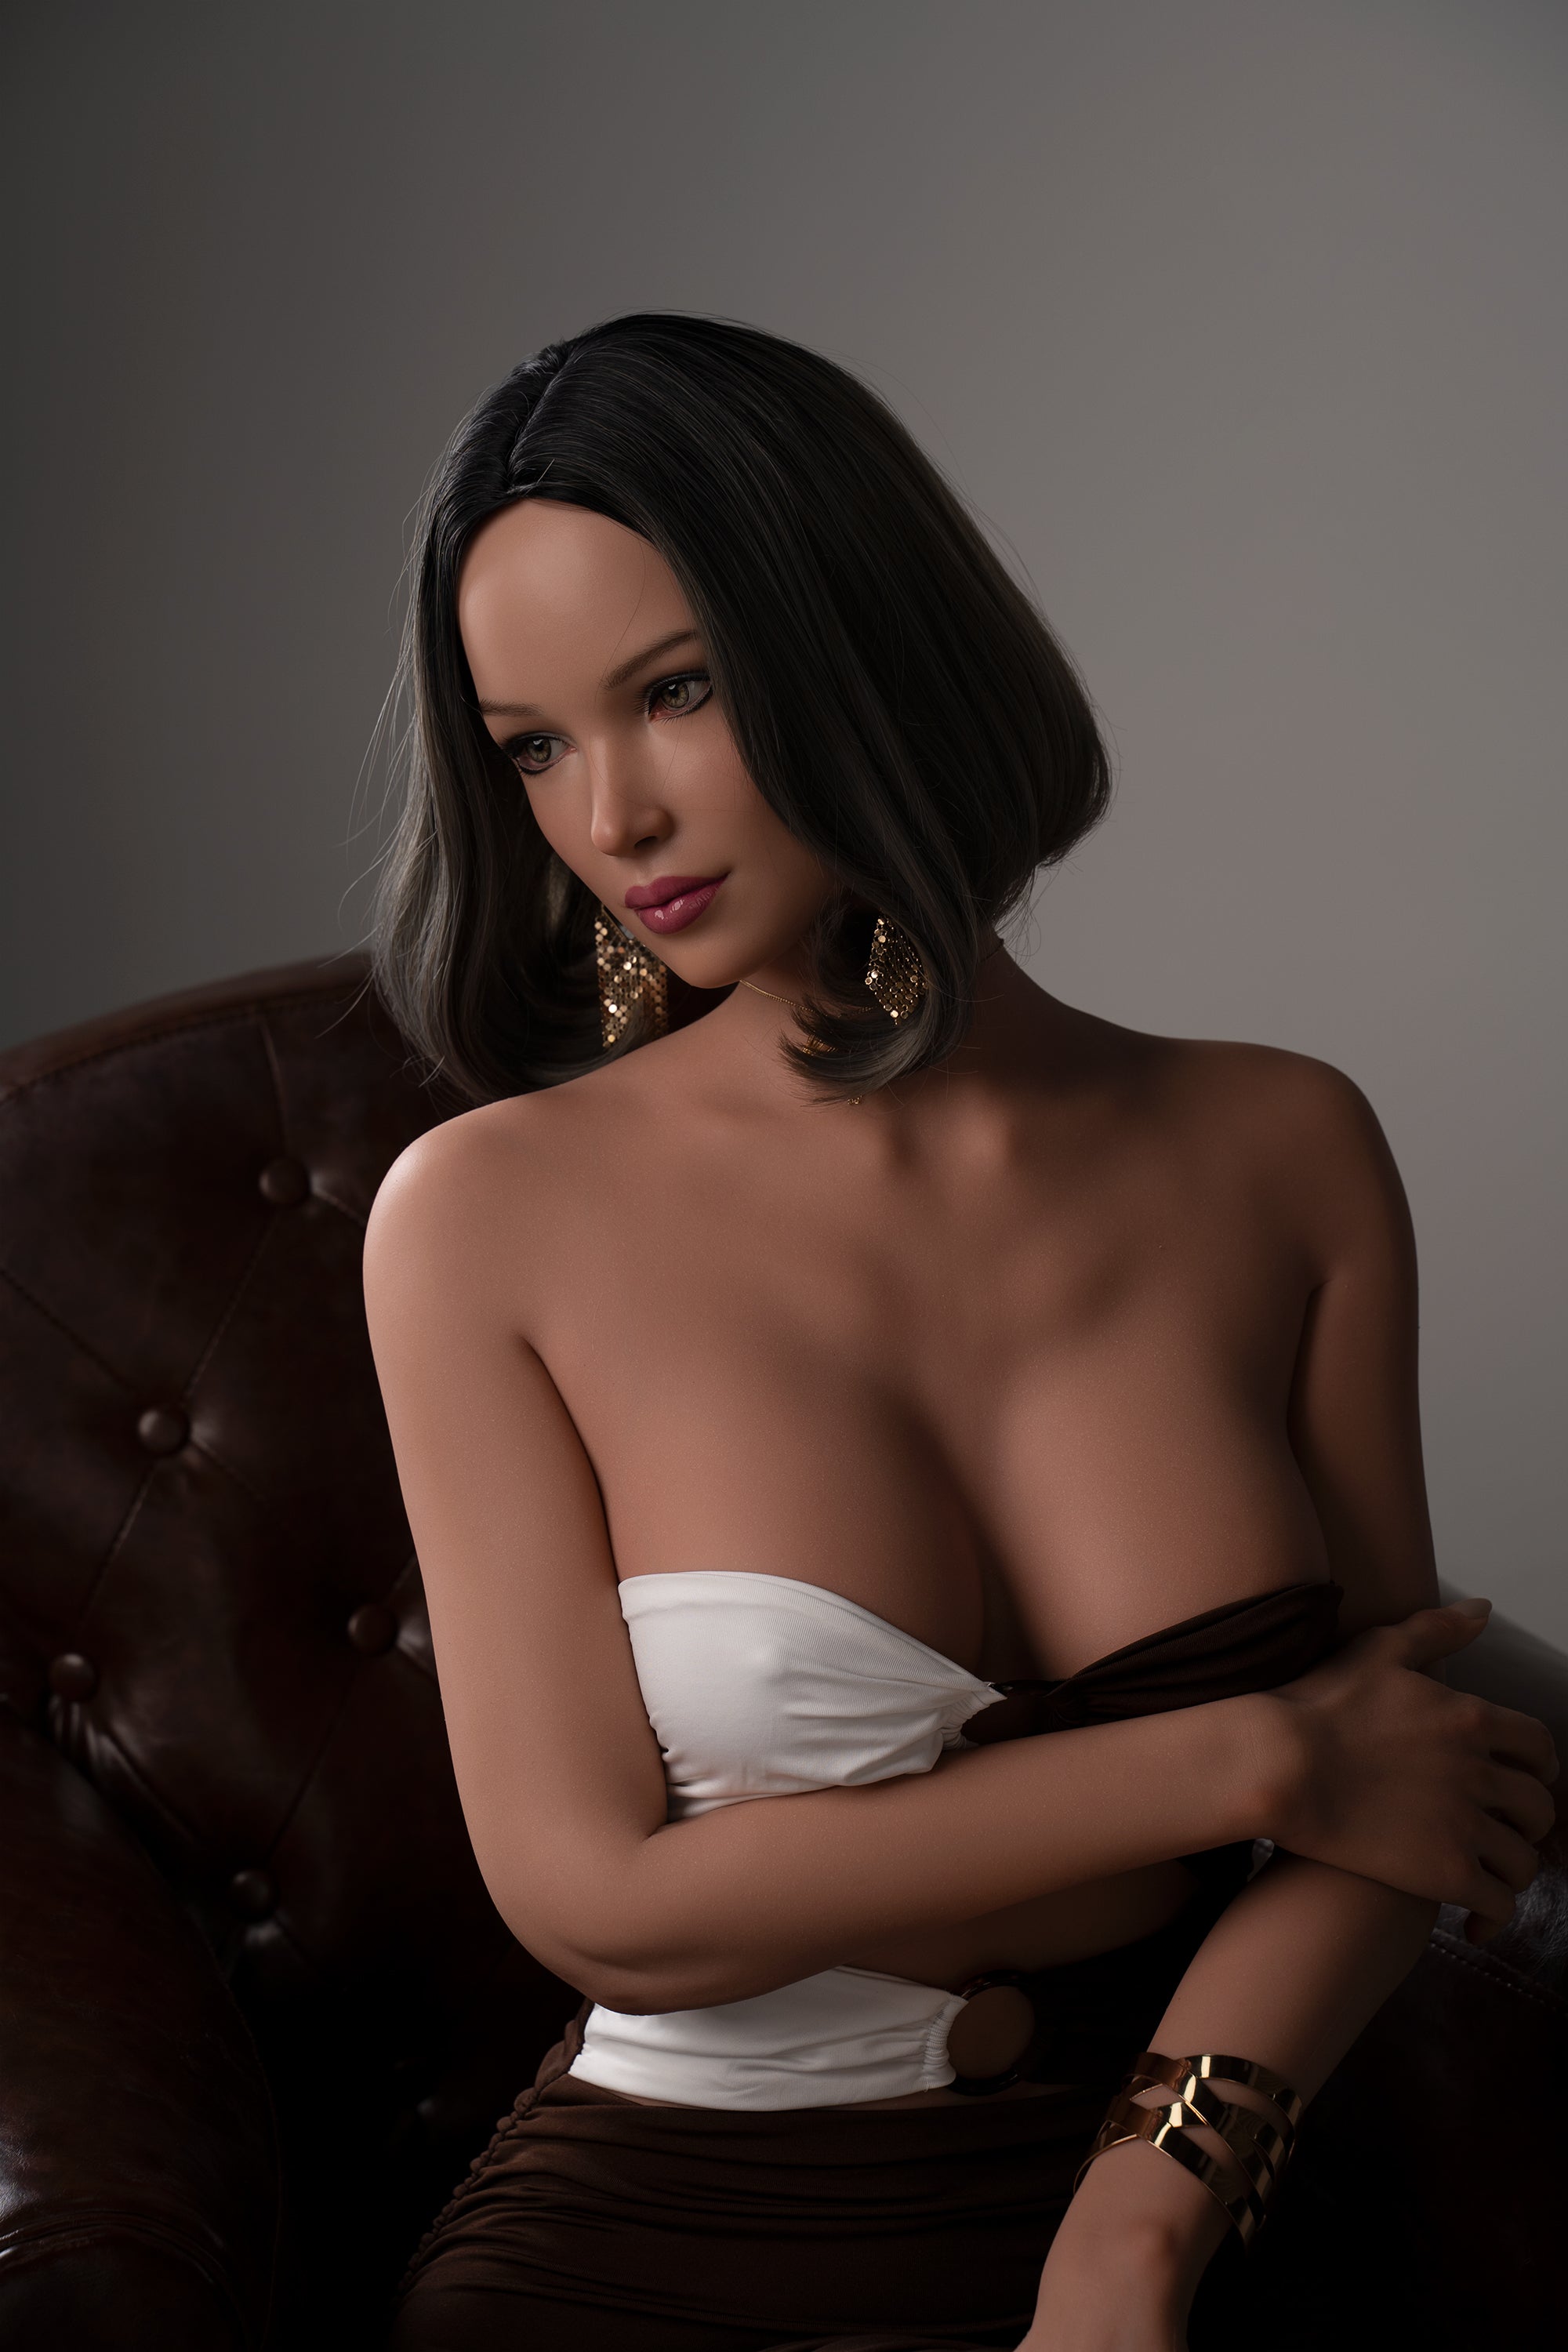 Zelex Doll 170 cm C Silicone - Baylor | Buy Sex Dolls at DOLLS ACTUALLY